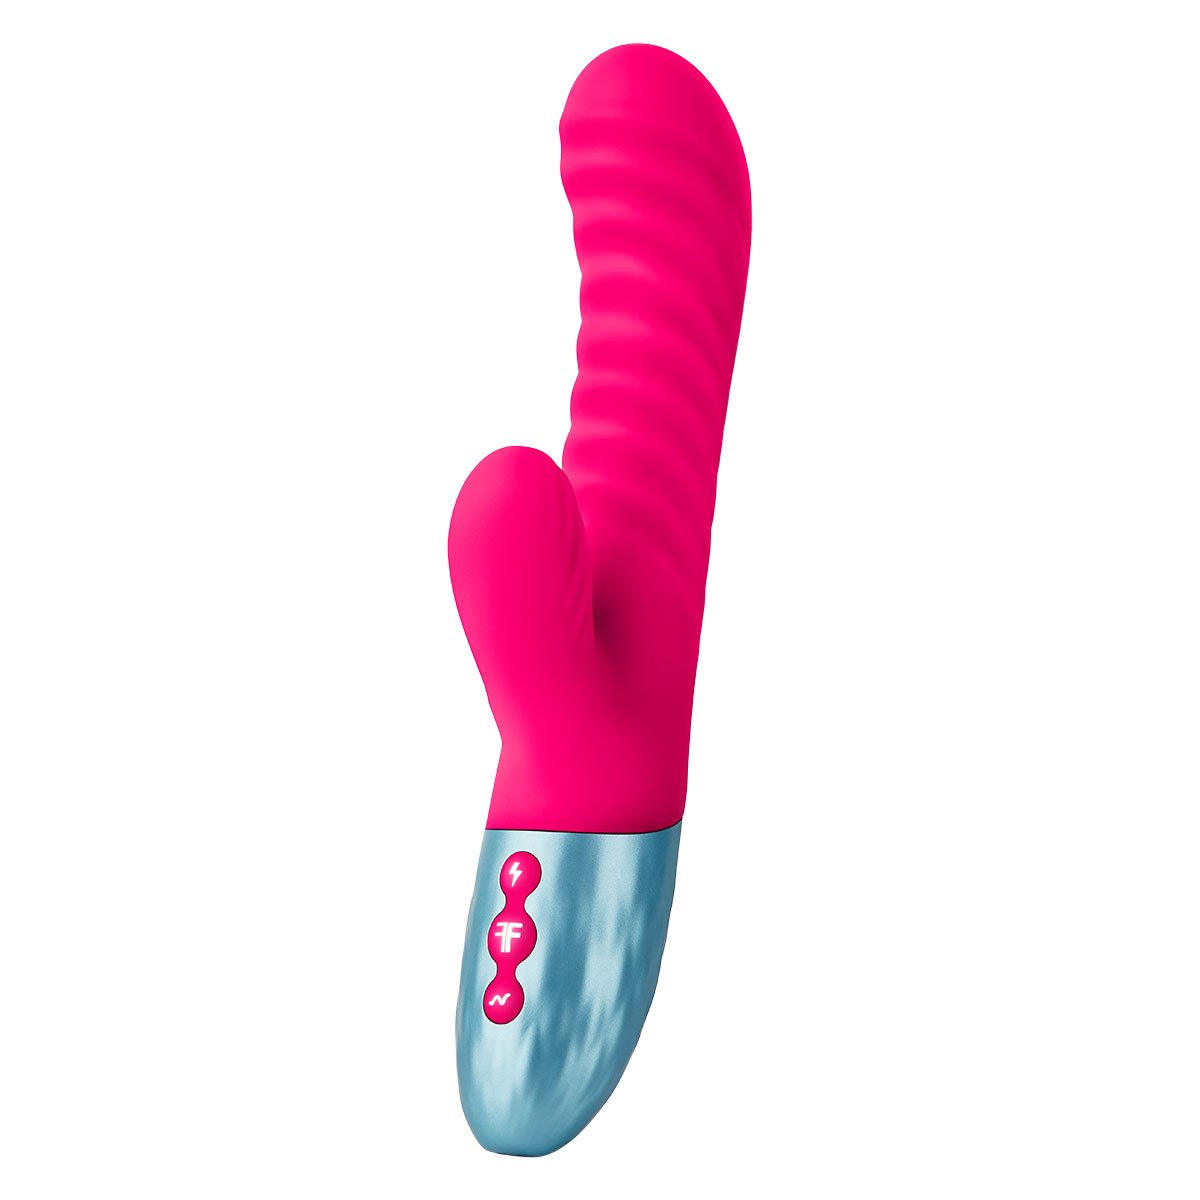 Femme Funn DELOLA - Buy At Luxury Toy X - Free 3-Day Shipping